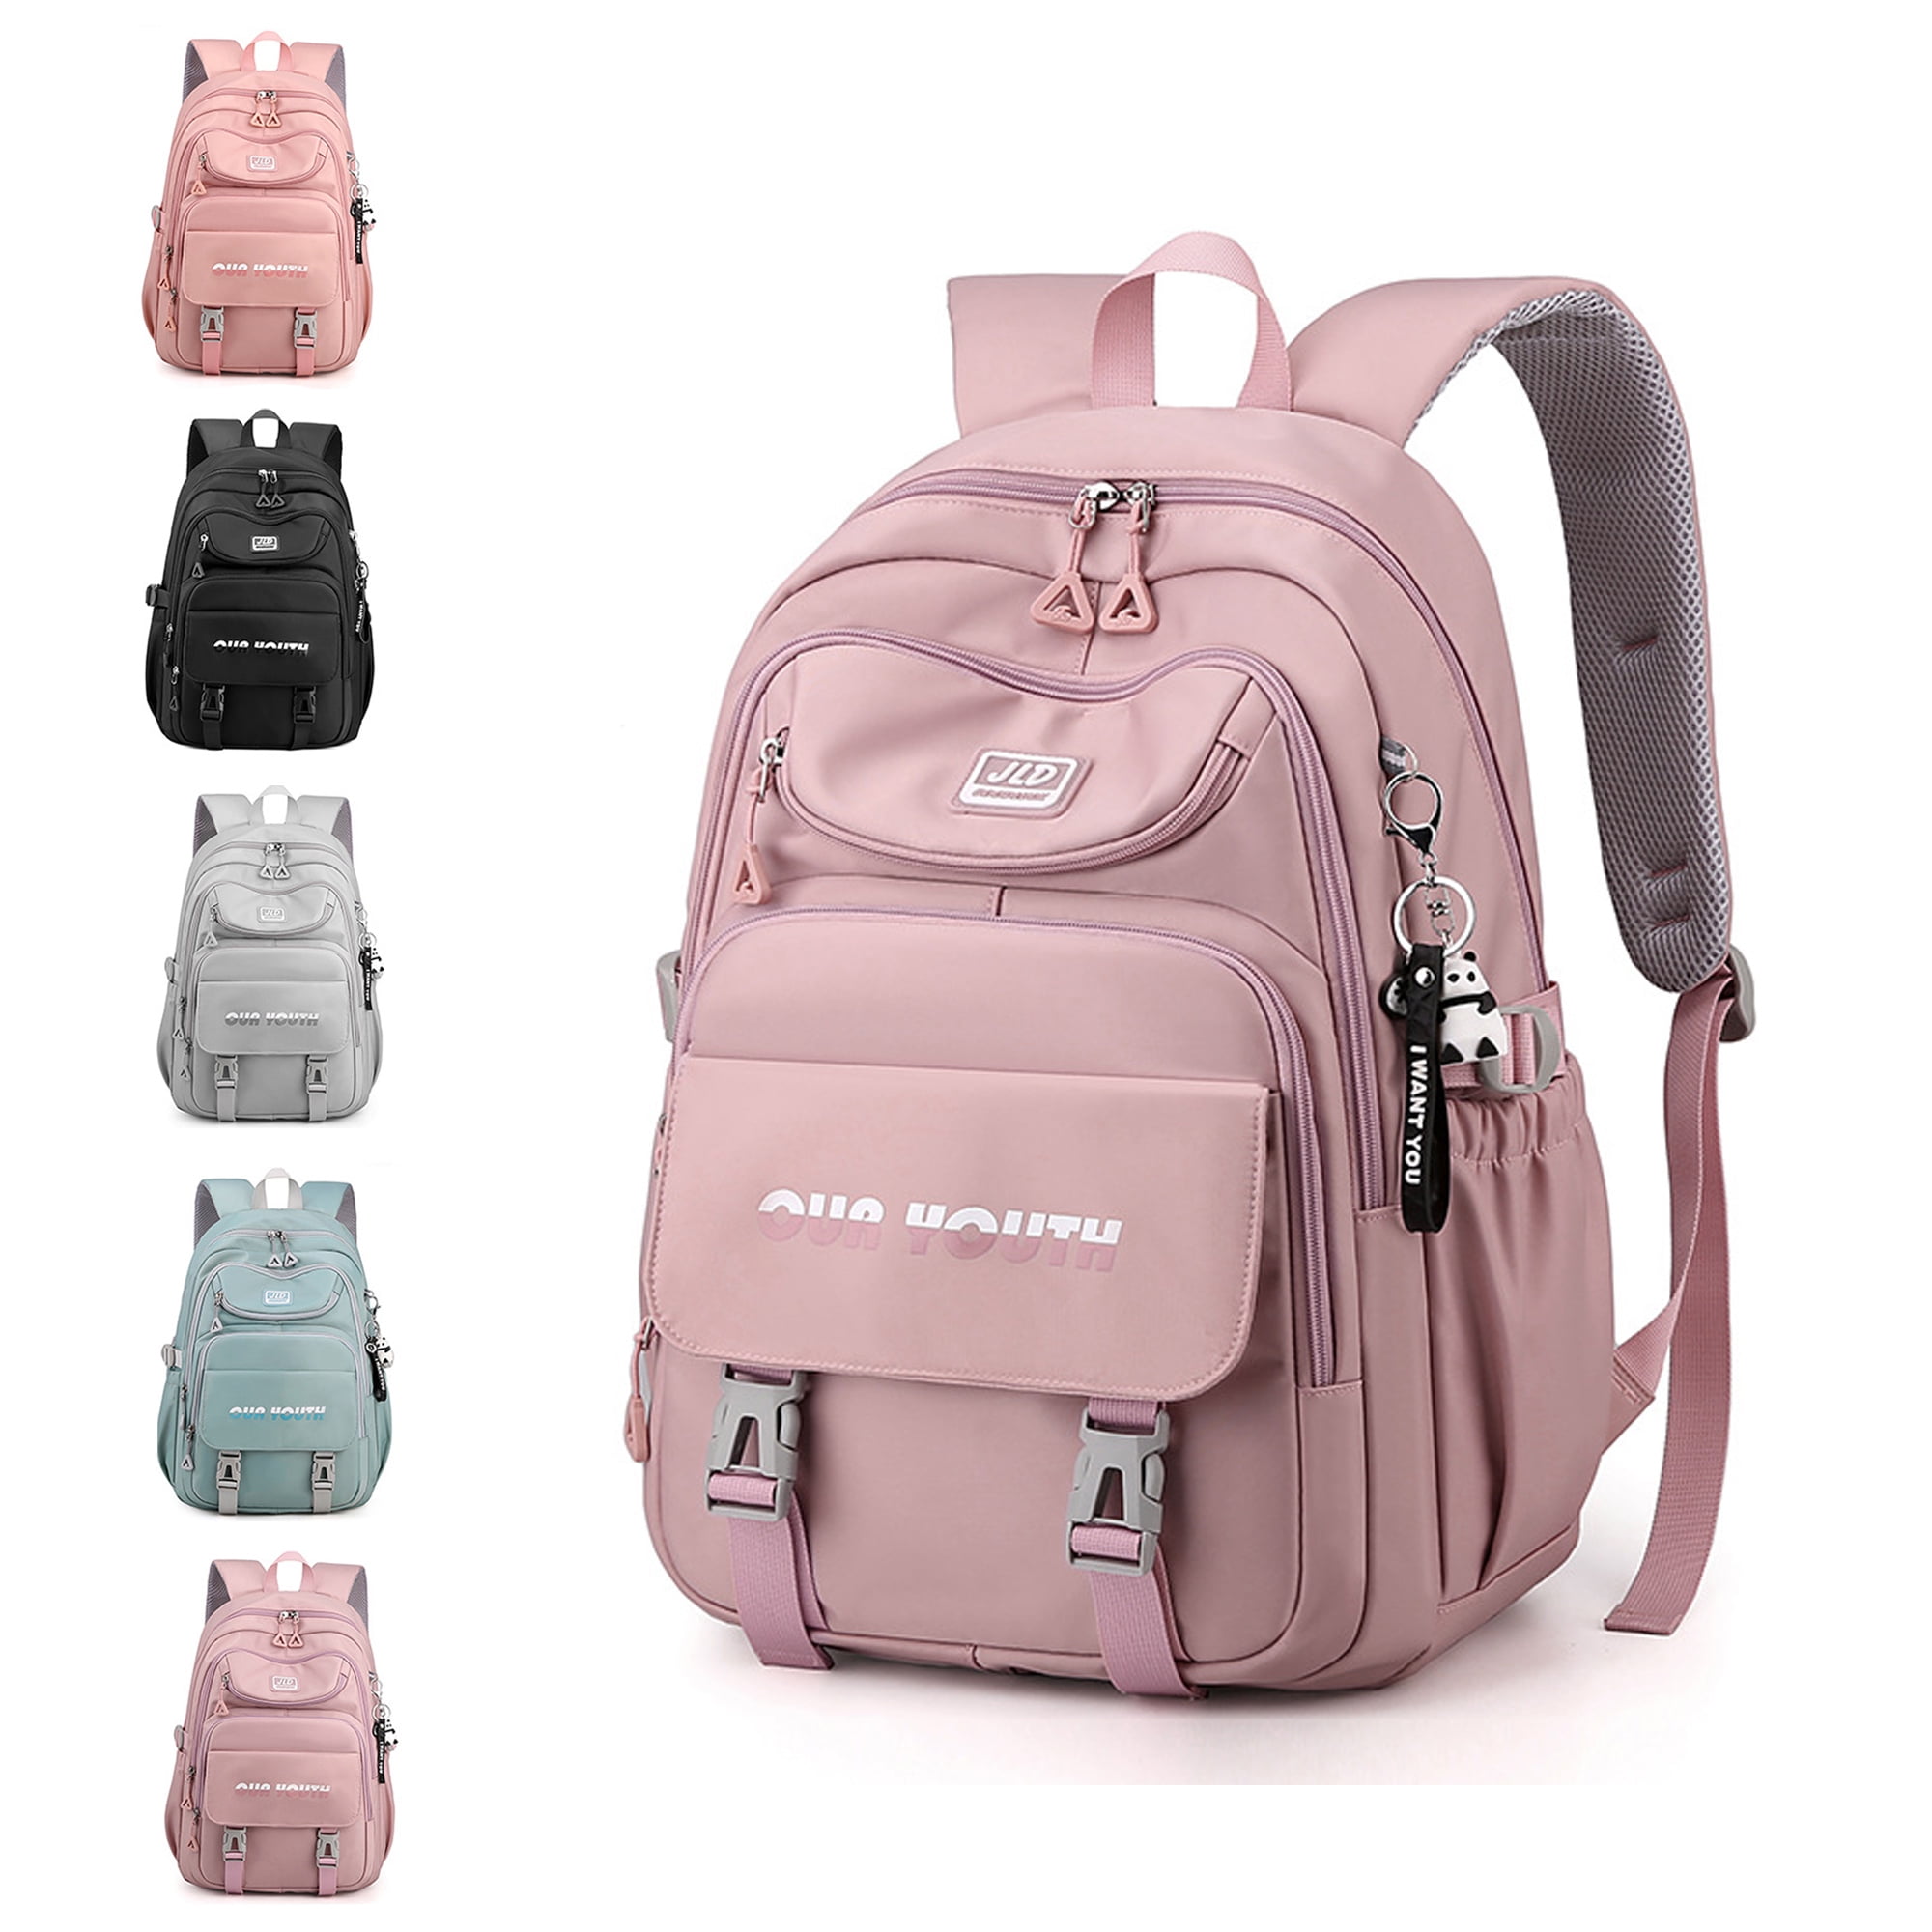 Black School Backpacks for Girls with USB Charging Port Book Bags Black/Pink/Grey